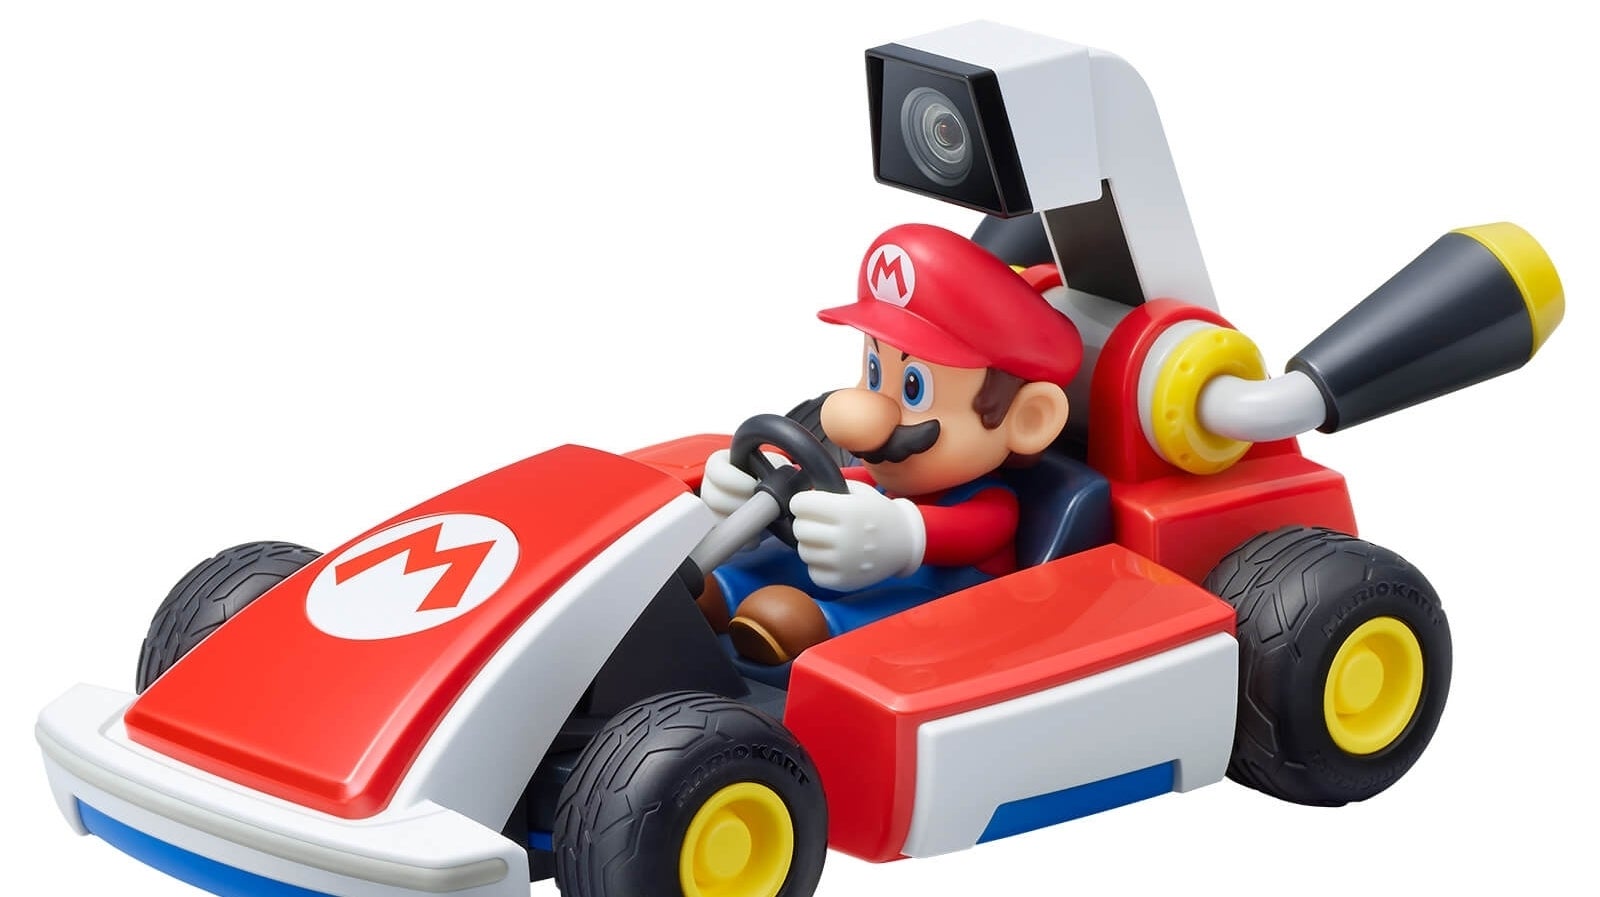 Image for Mario Kart Live: Home Circuit costs £100